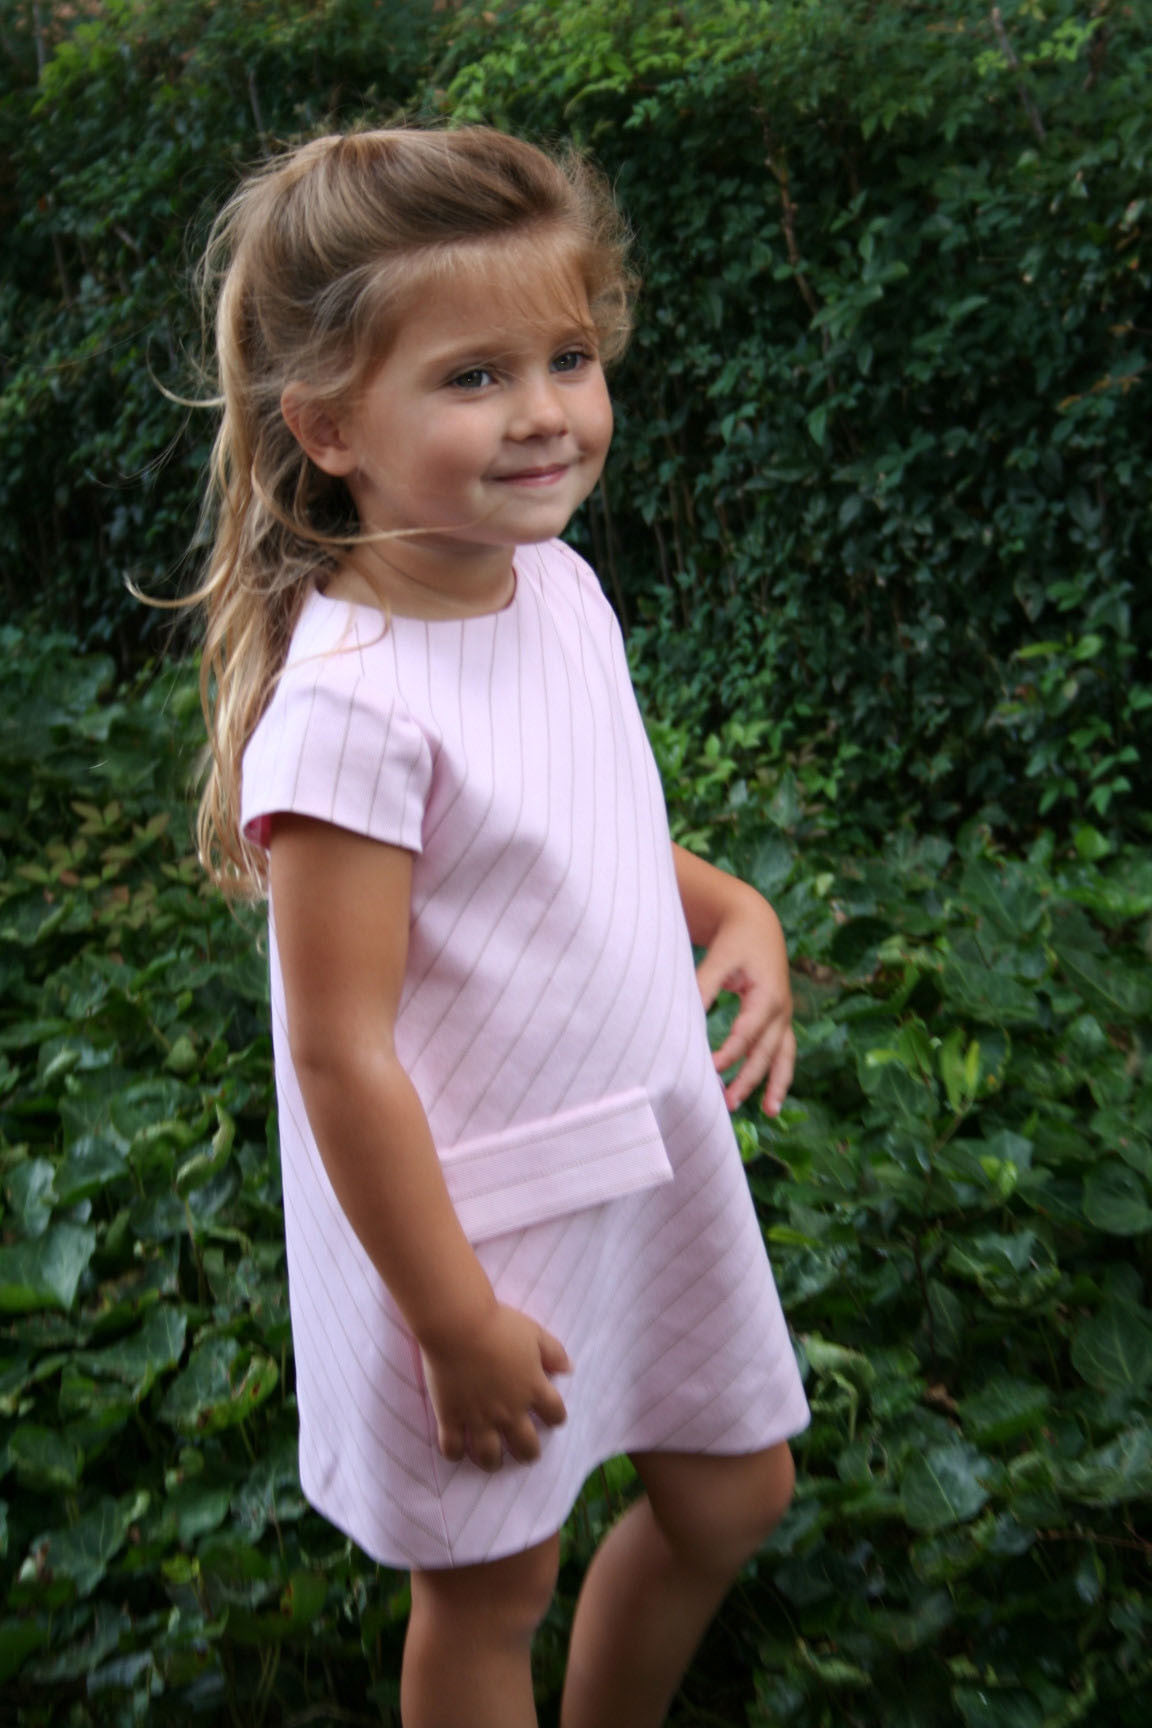 Helena and Harry Girl's Pink with Diagonal Stripes Dress